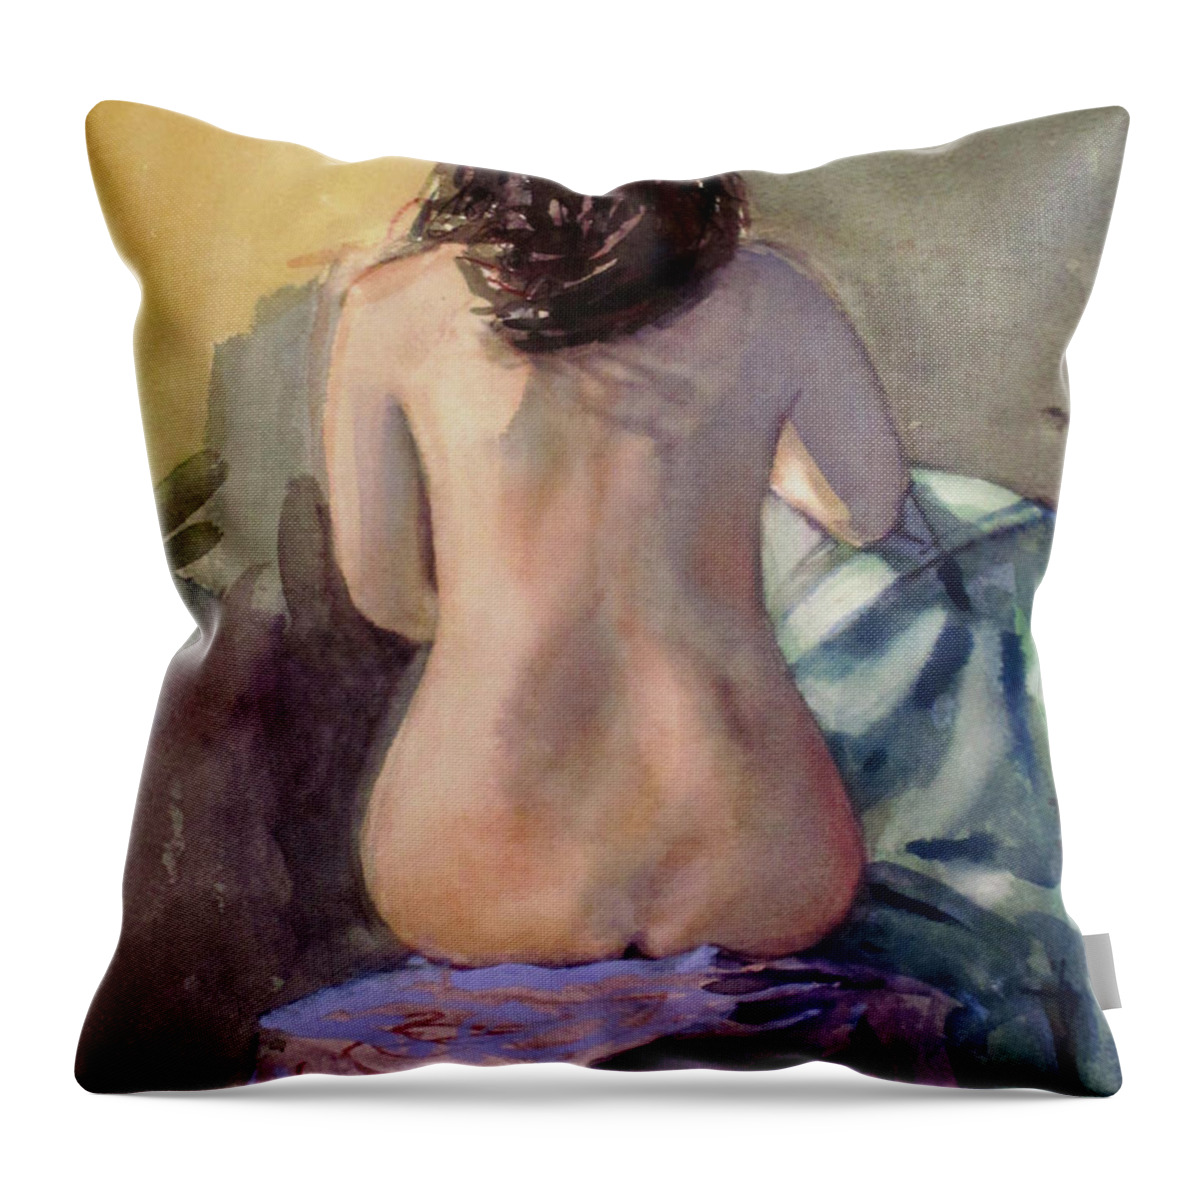 Nude Back Watercolor Throw Pillow featuring the painting A Woman's Back by Mark Lunde